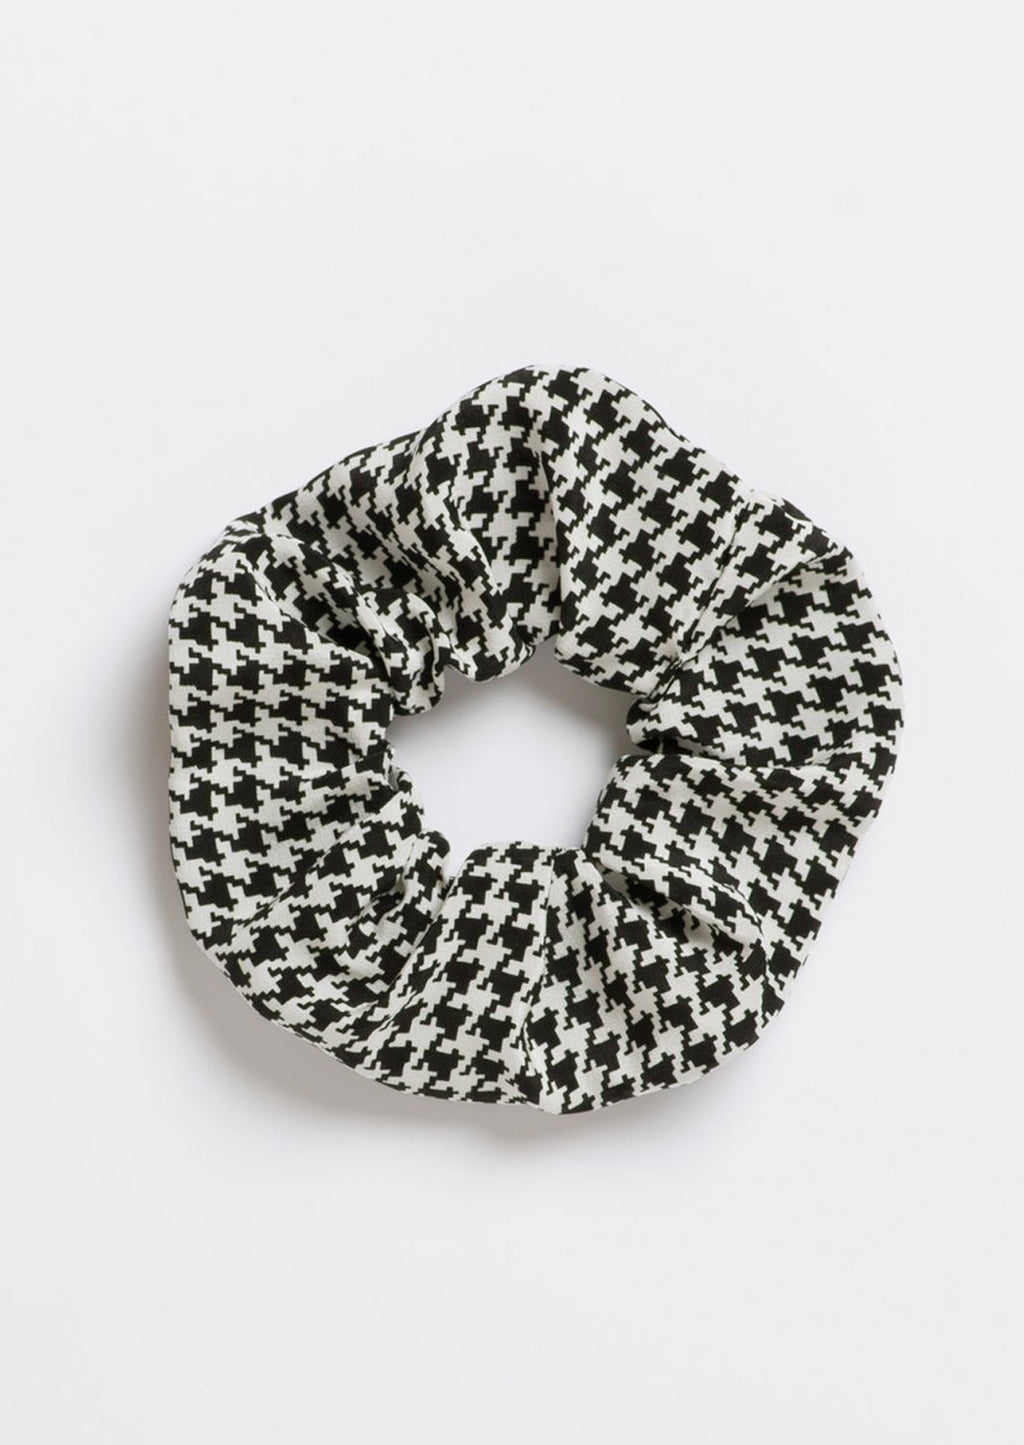 Houndstooth: A silk scrunchie in black and white houndstooth.